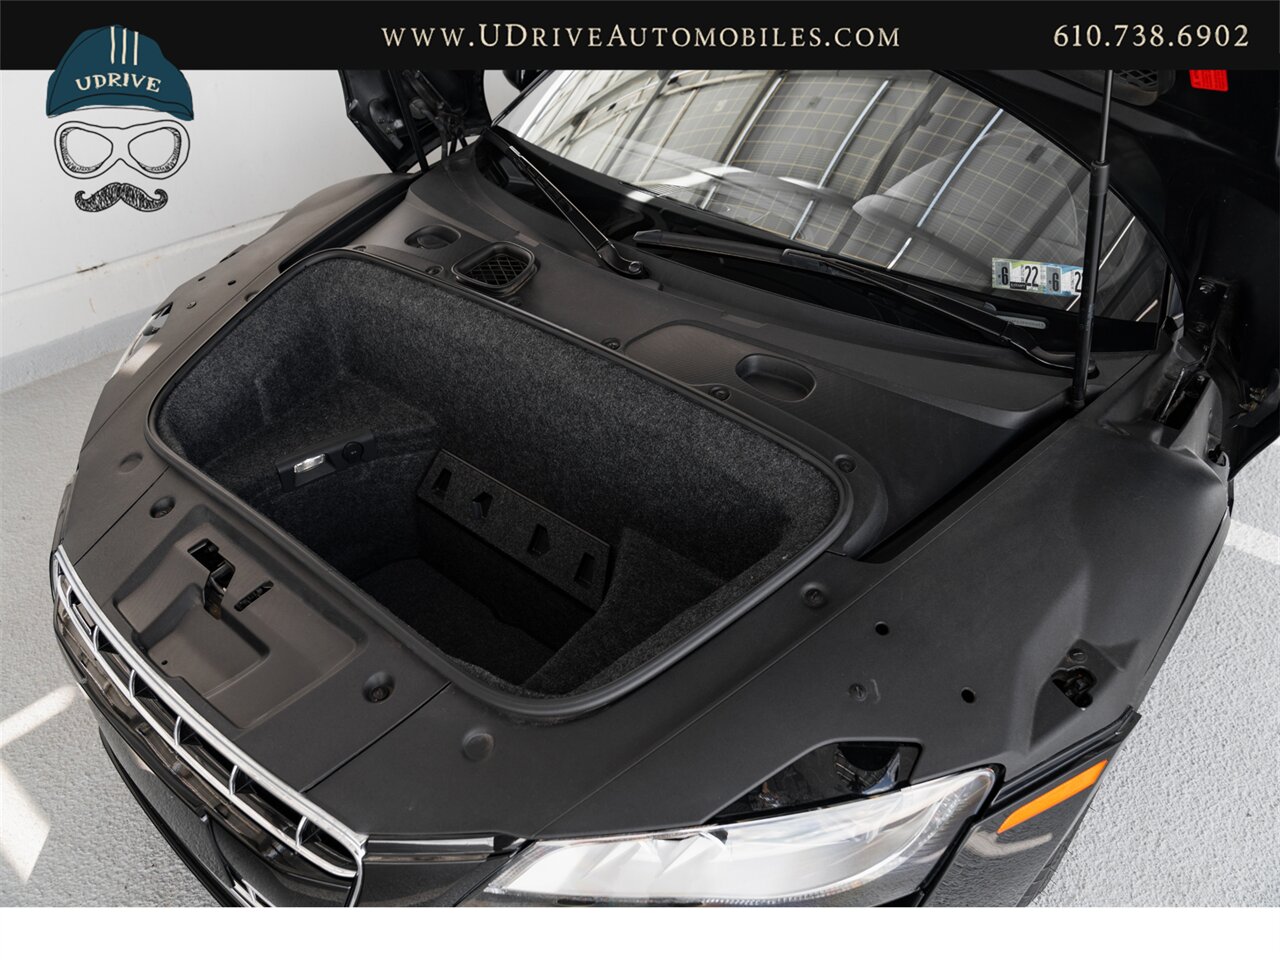 2011 Audi R8 5.2 Quattro  V10 6 Speed Manual - Photo 43 - West Chester, PA 19382